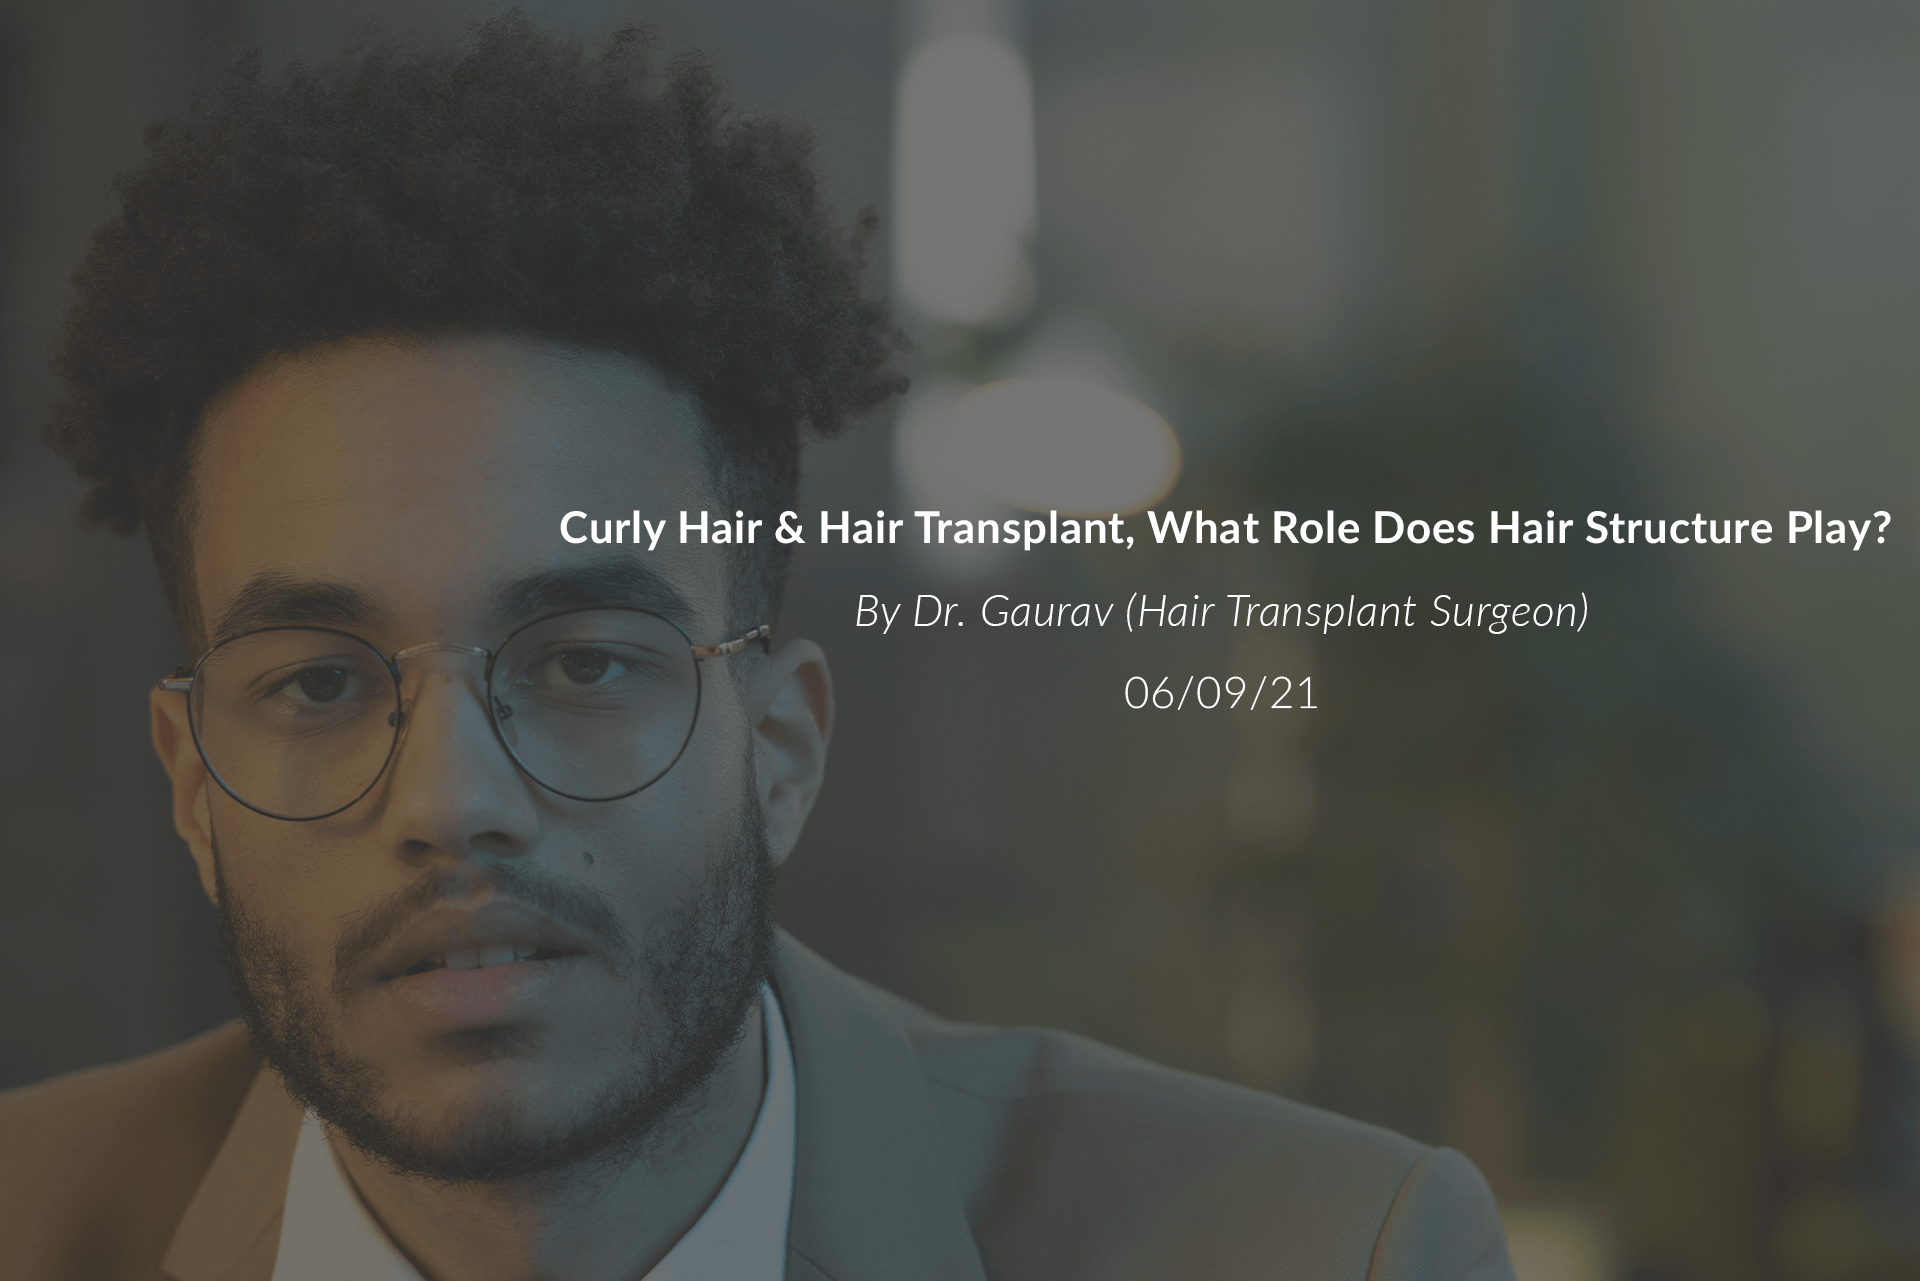 Curly Hair & Hair Transplant, What Role Does Hair Structure Play?